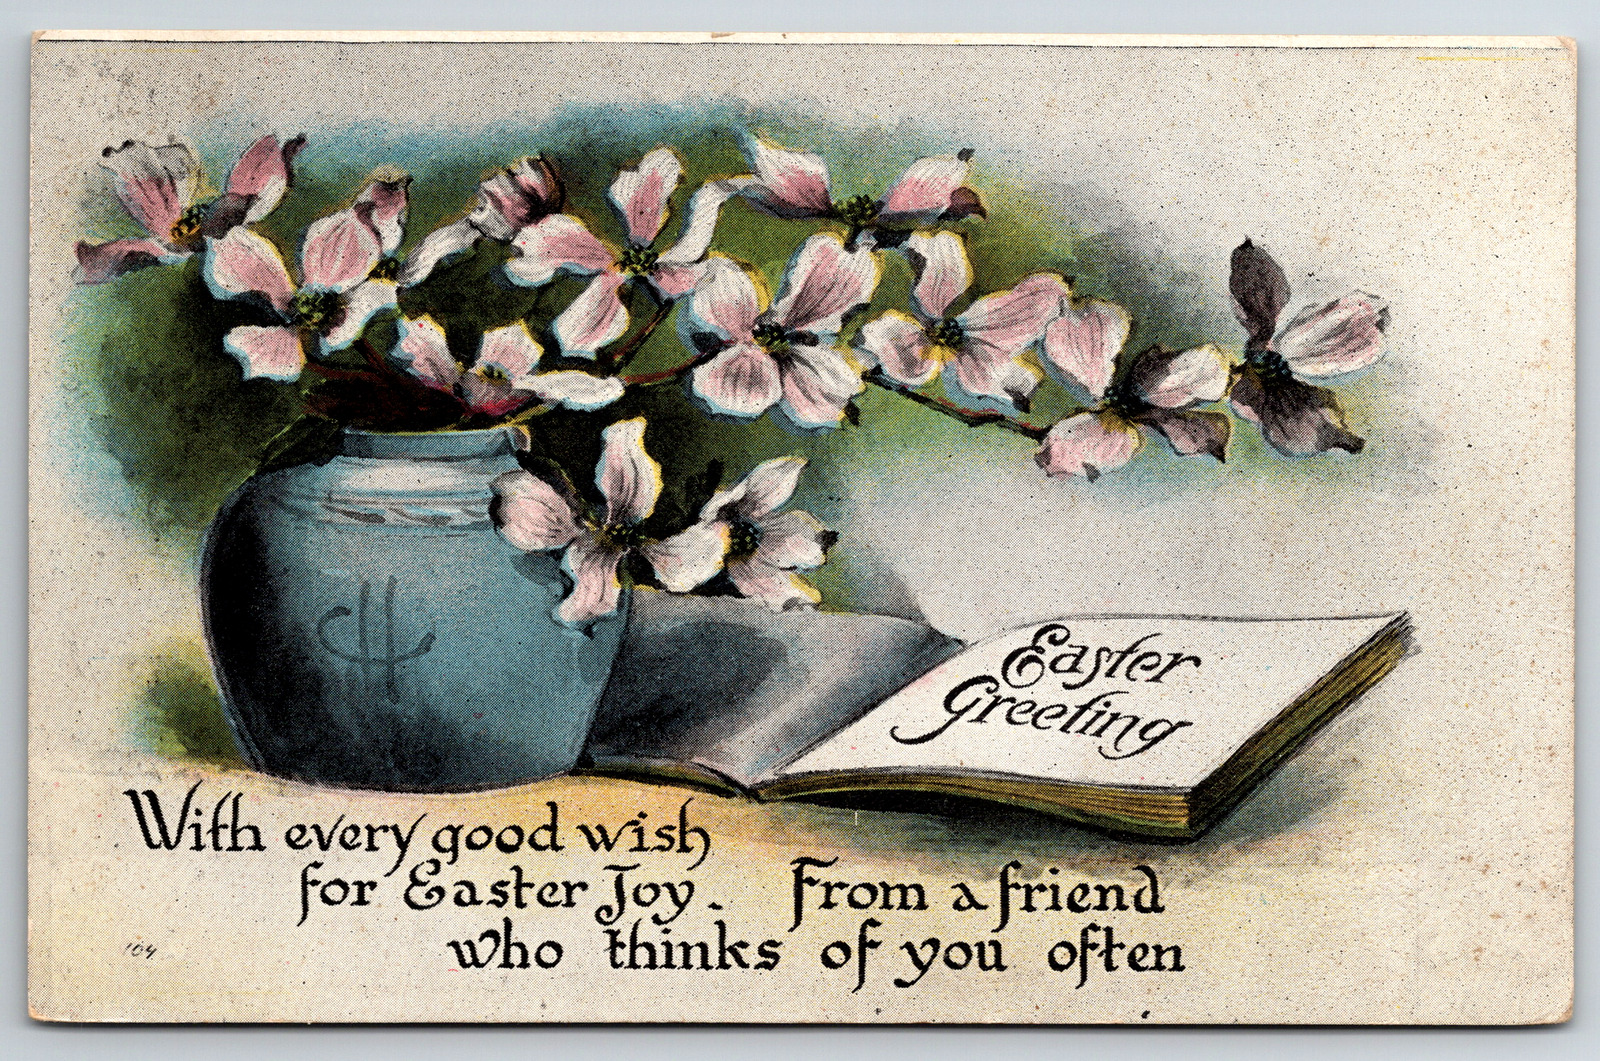 c1930s Easter Greeting From a Friend Thinking of You Flowers Vintage Postcard